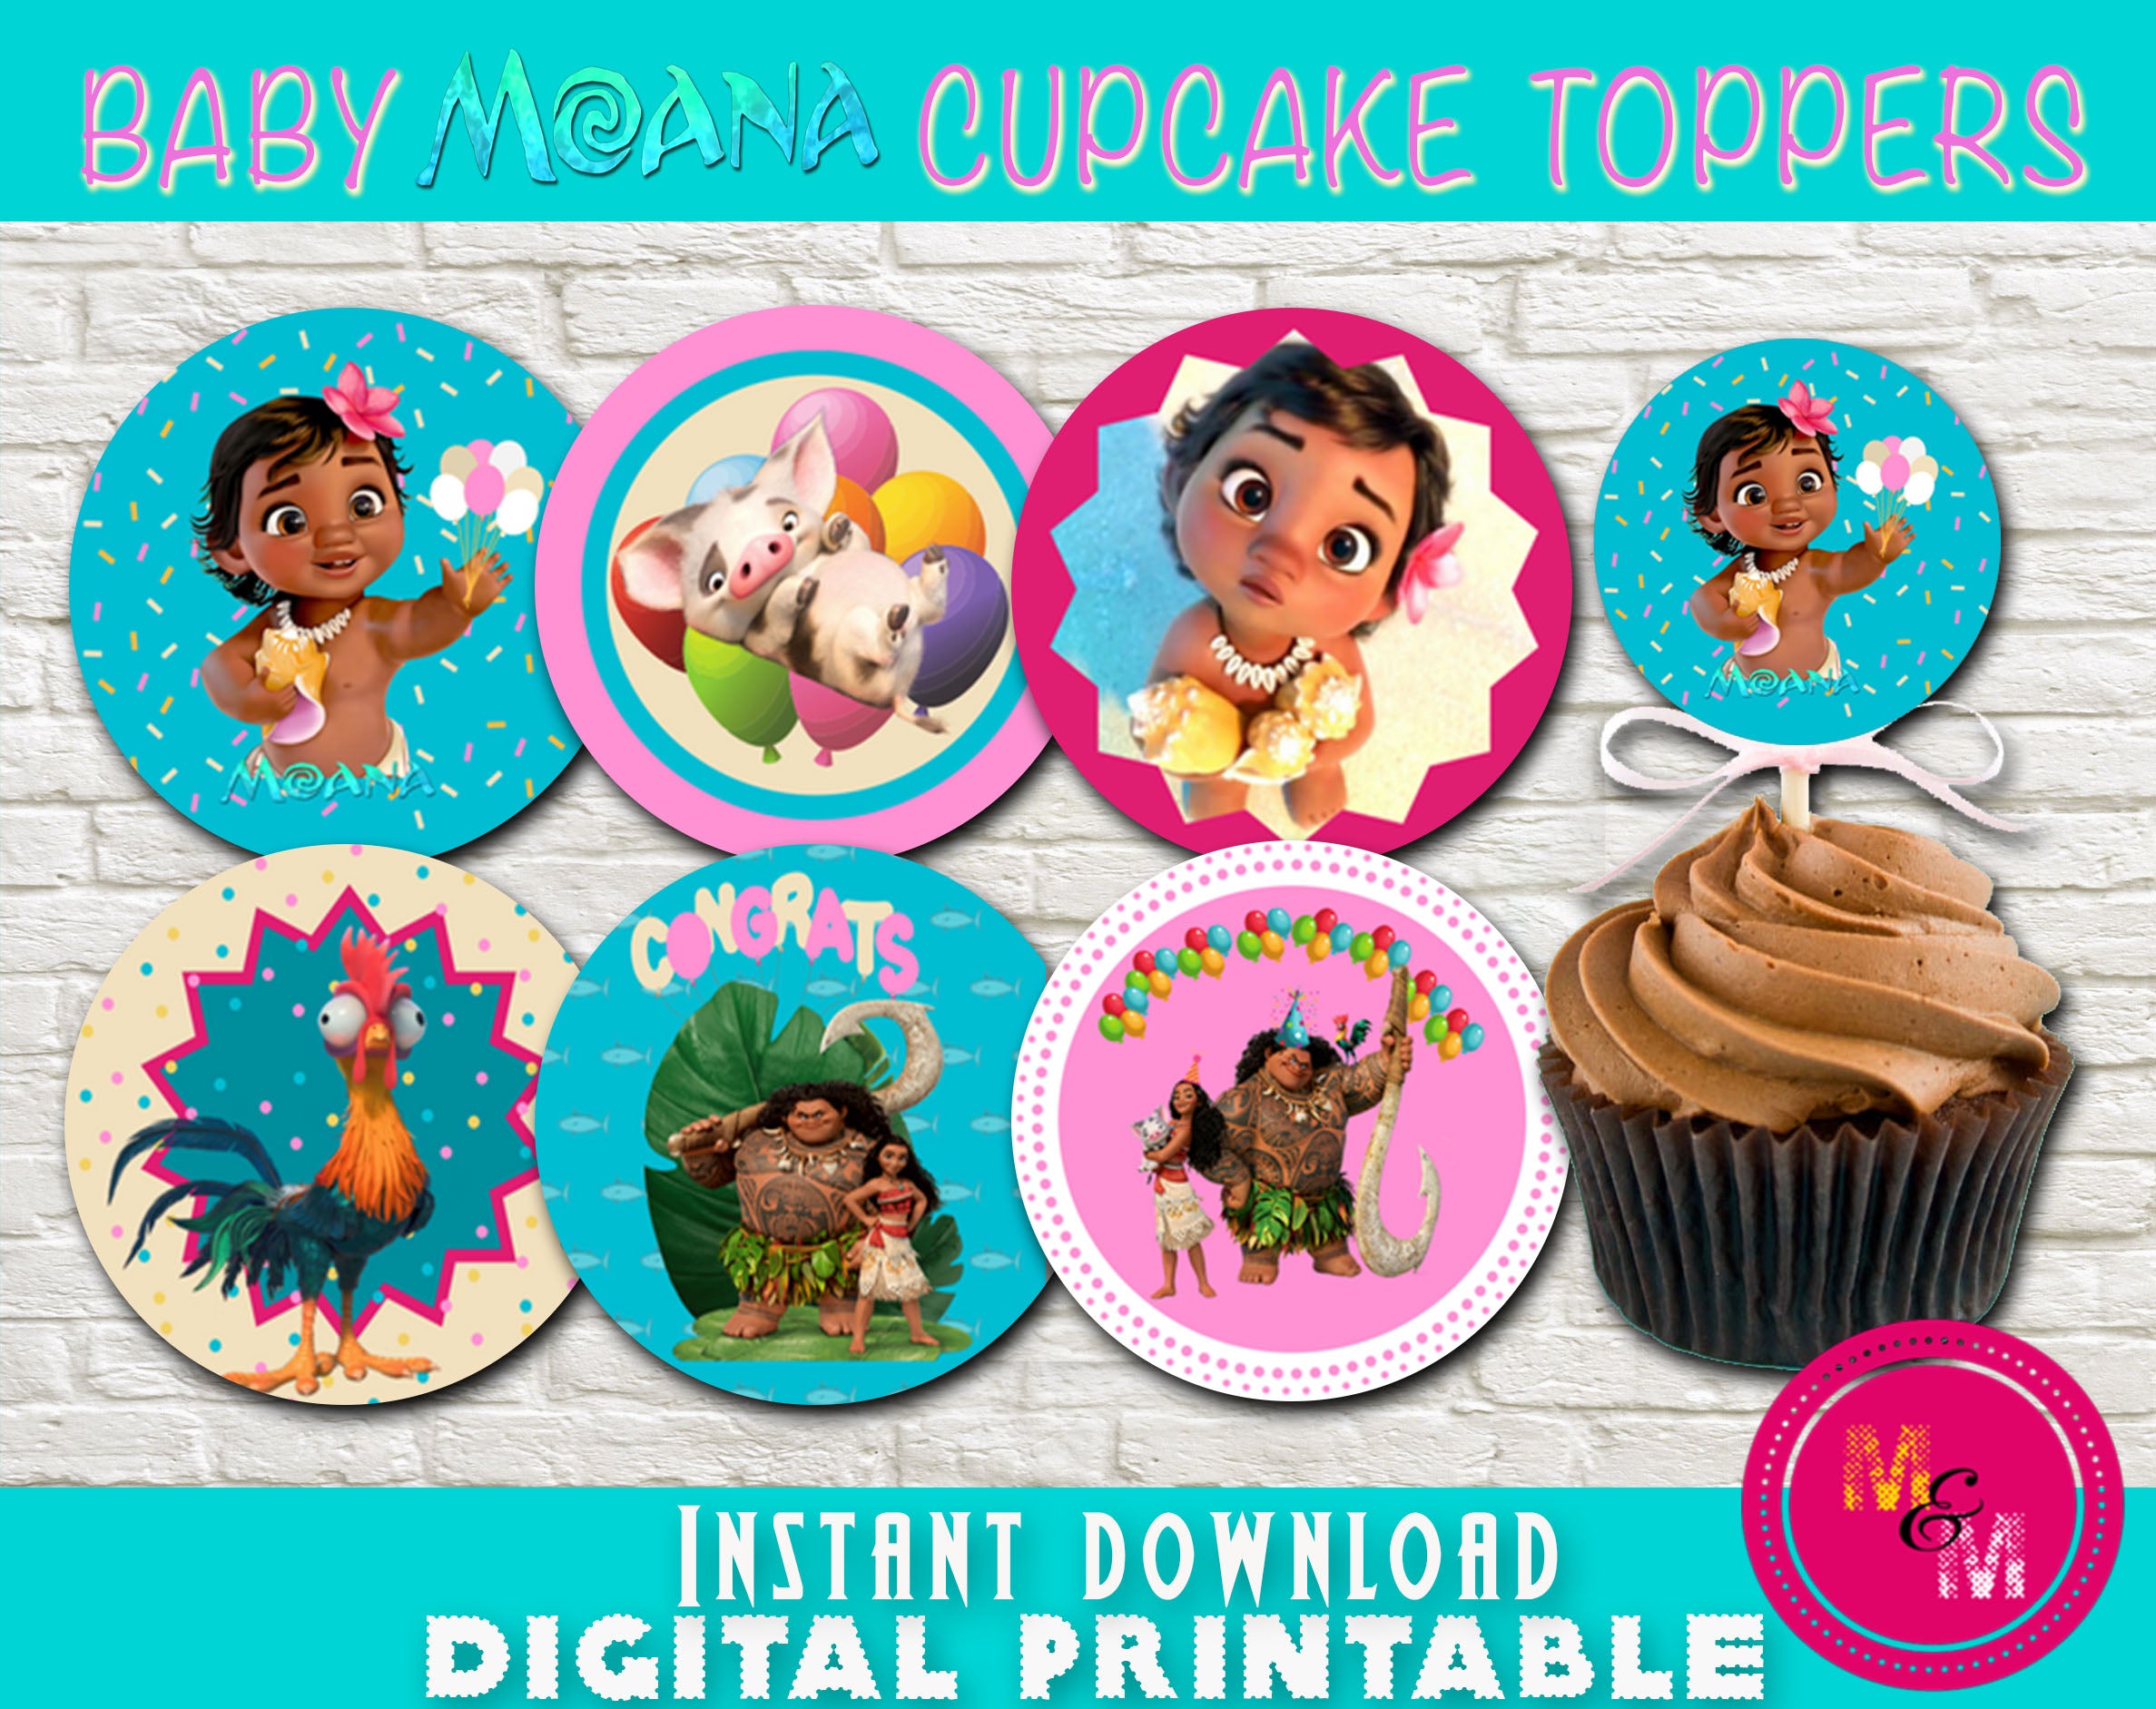 Baby Moana Cupcake Toppers, Baby Moana Party, Maui Party - mugandmousedesigns